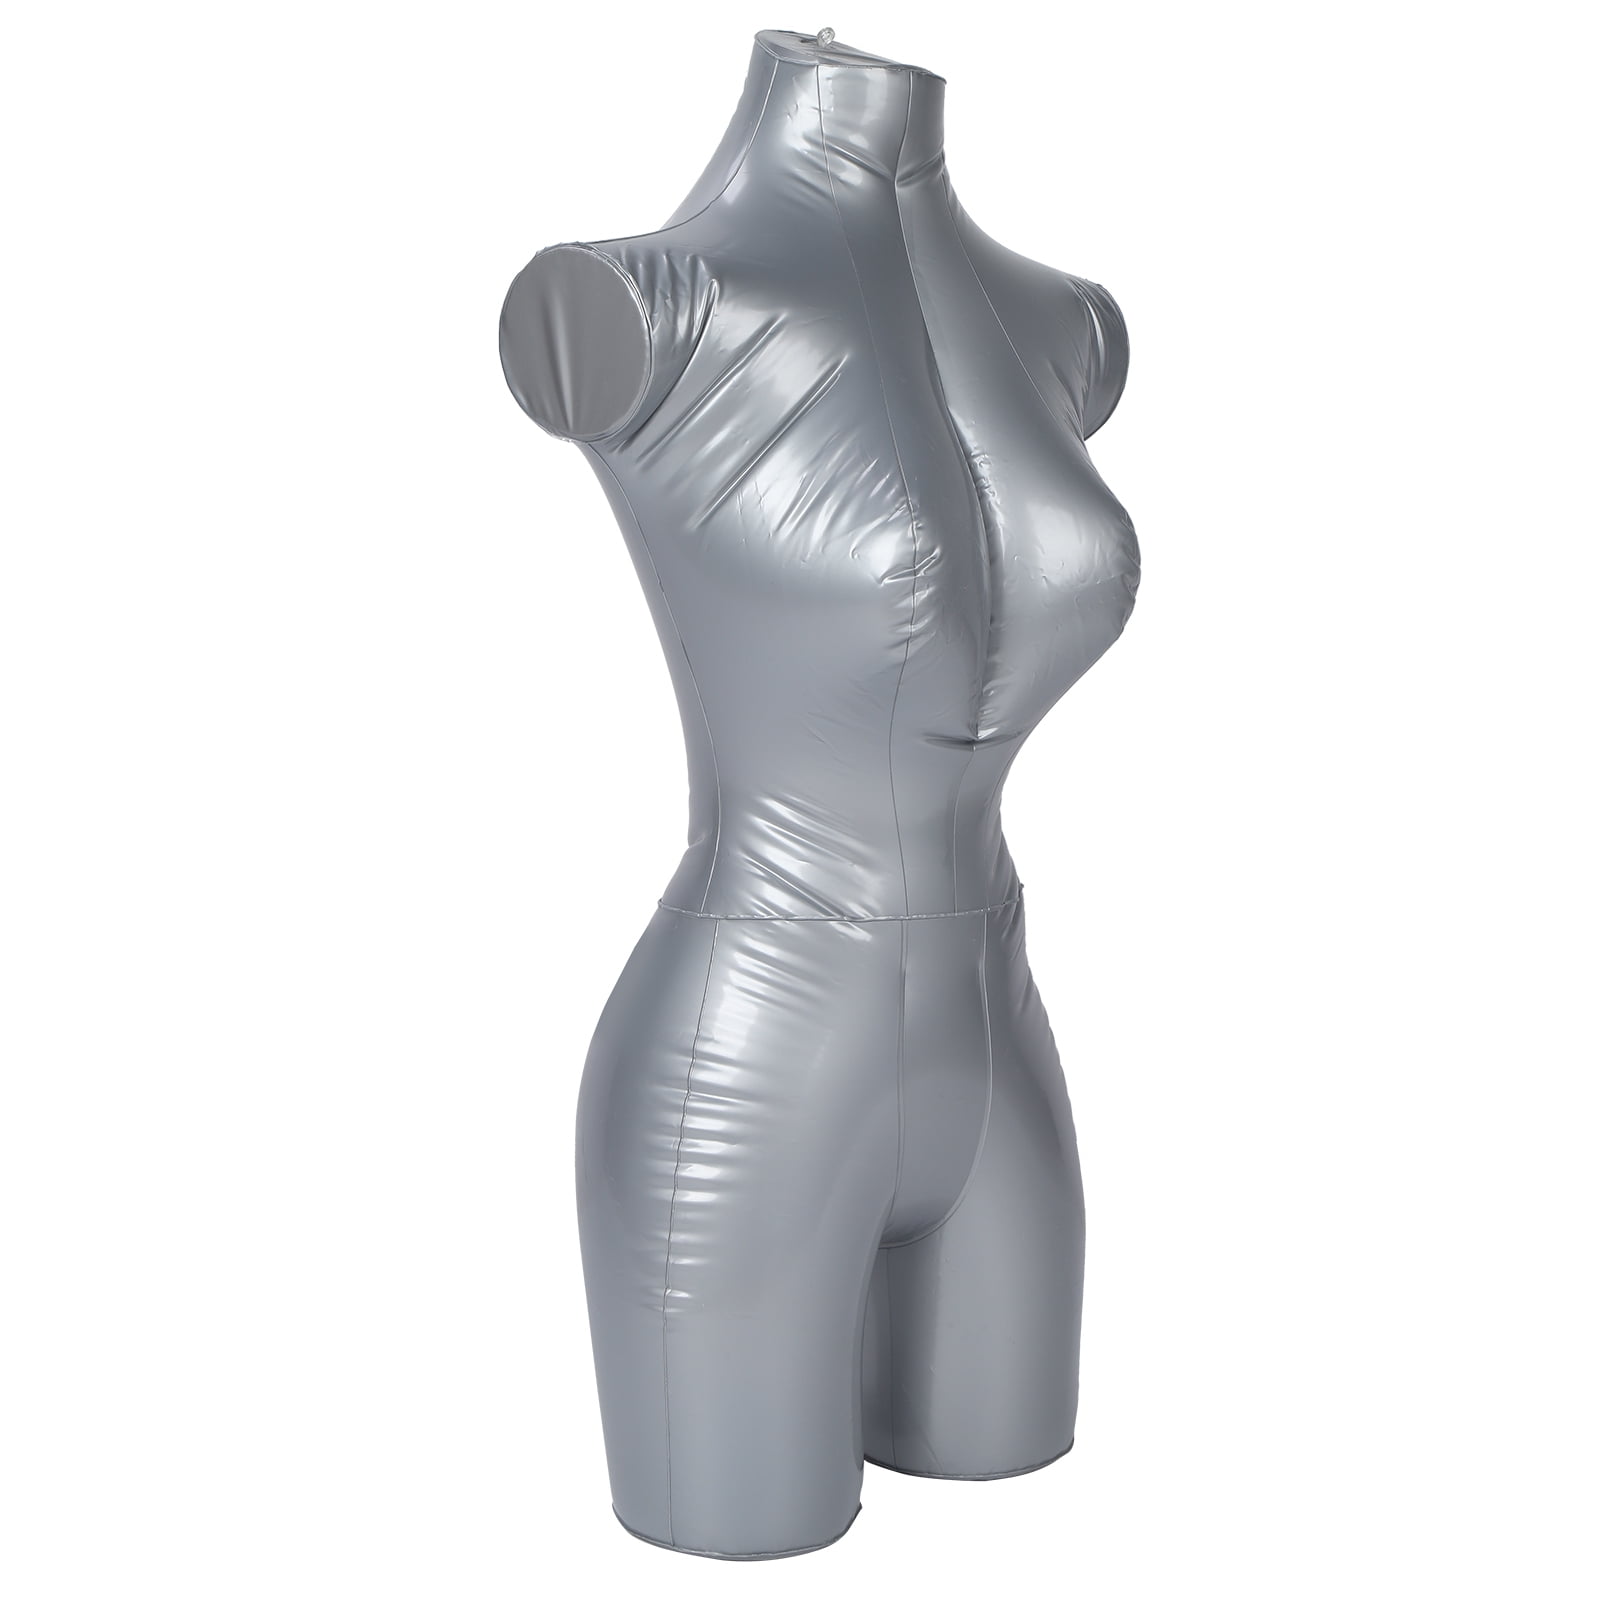 Ladies Female Inflatable Model Dummy Tailors Torso Body Clothing Mannequin 2019 